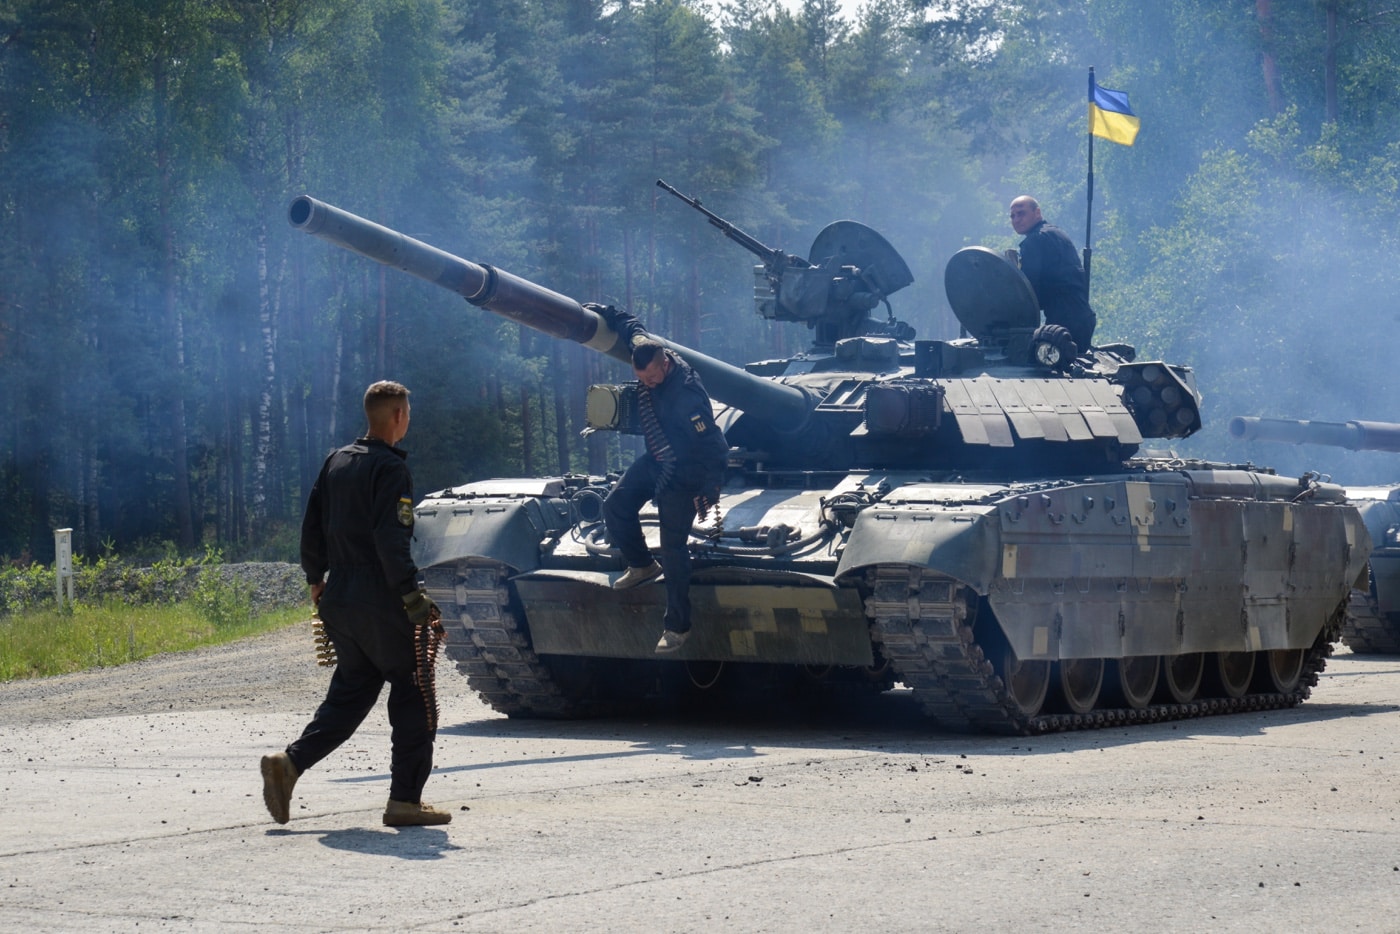 In this digital image, we see three Ukrainian soldiers dismount a T-84 tank after gunnery range training. Smoke from the tank engines hangs in the air.